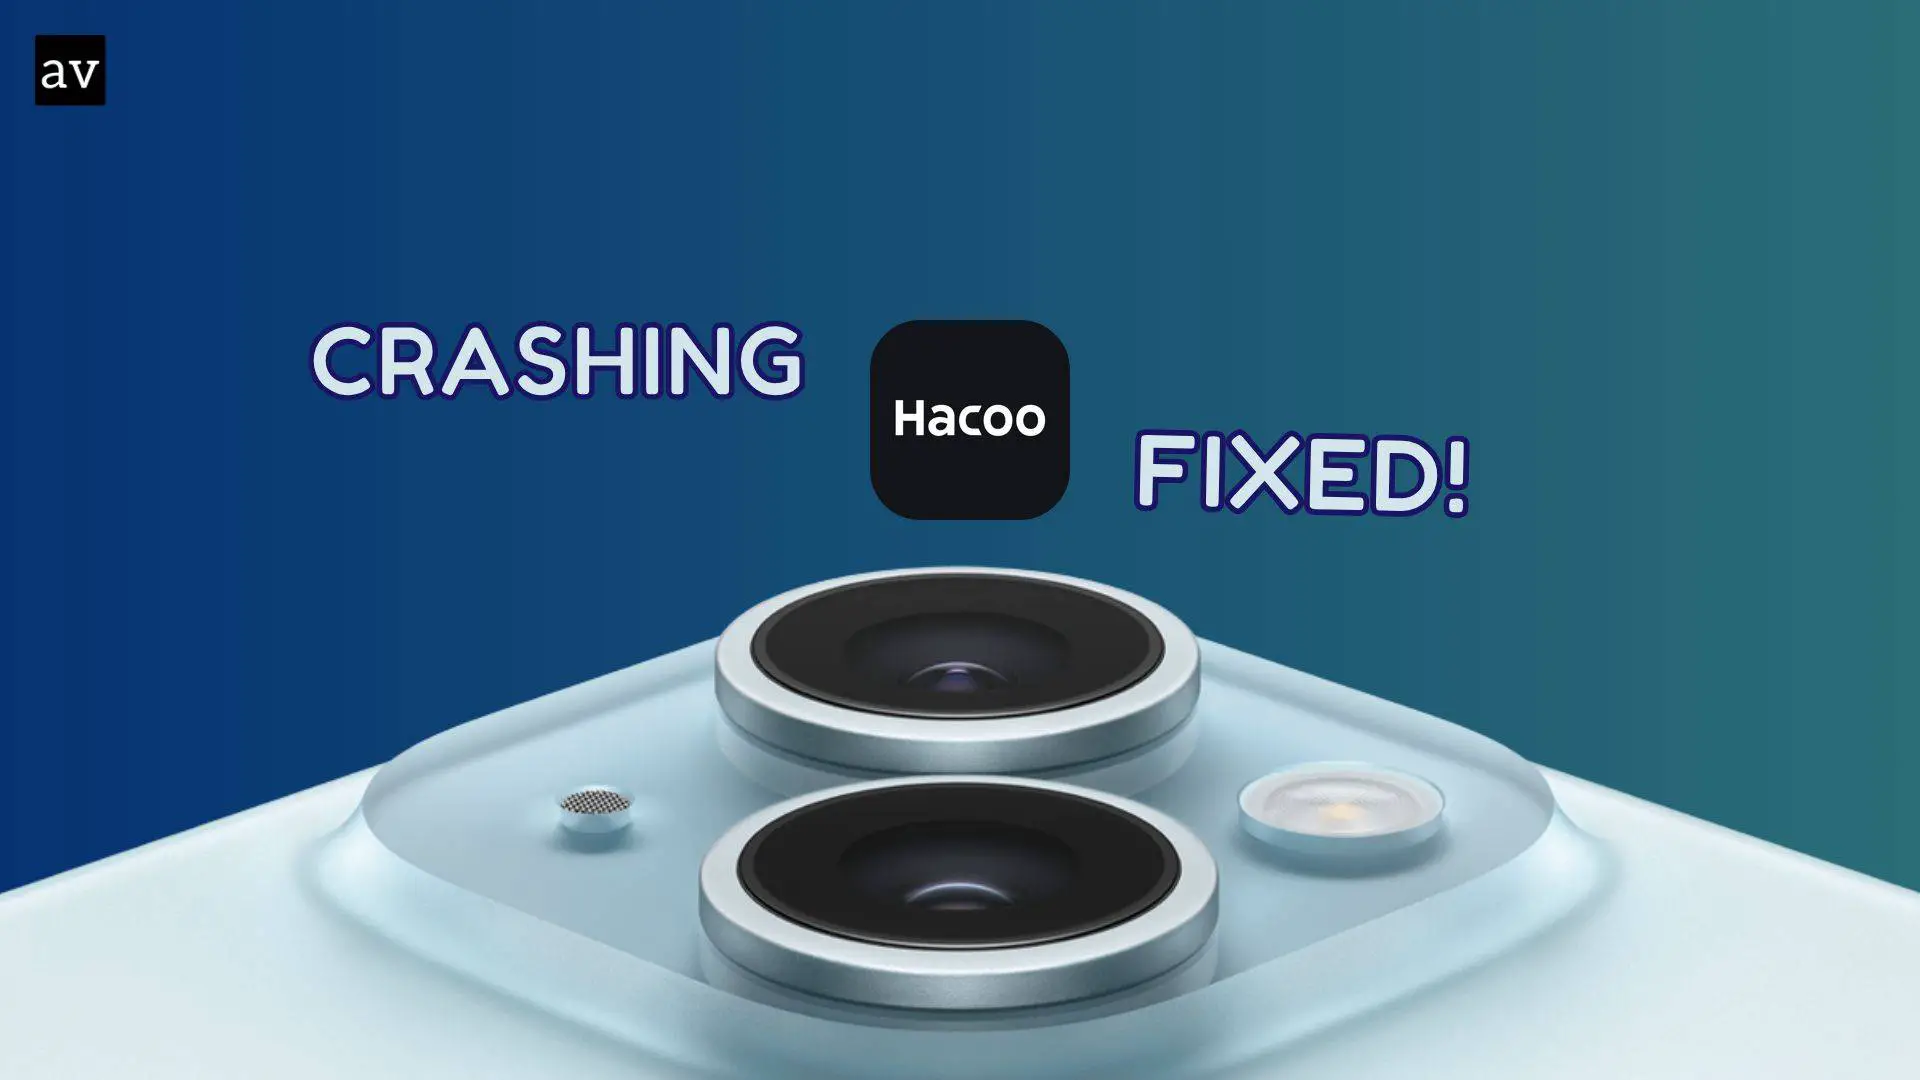 Hacoo and its fix of crashing by AppleVeteran